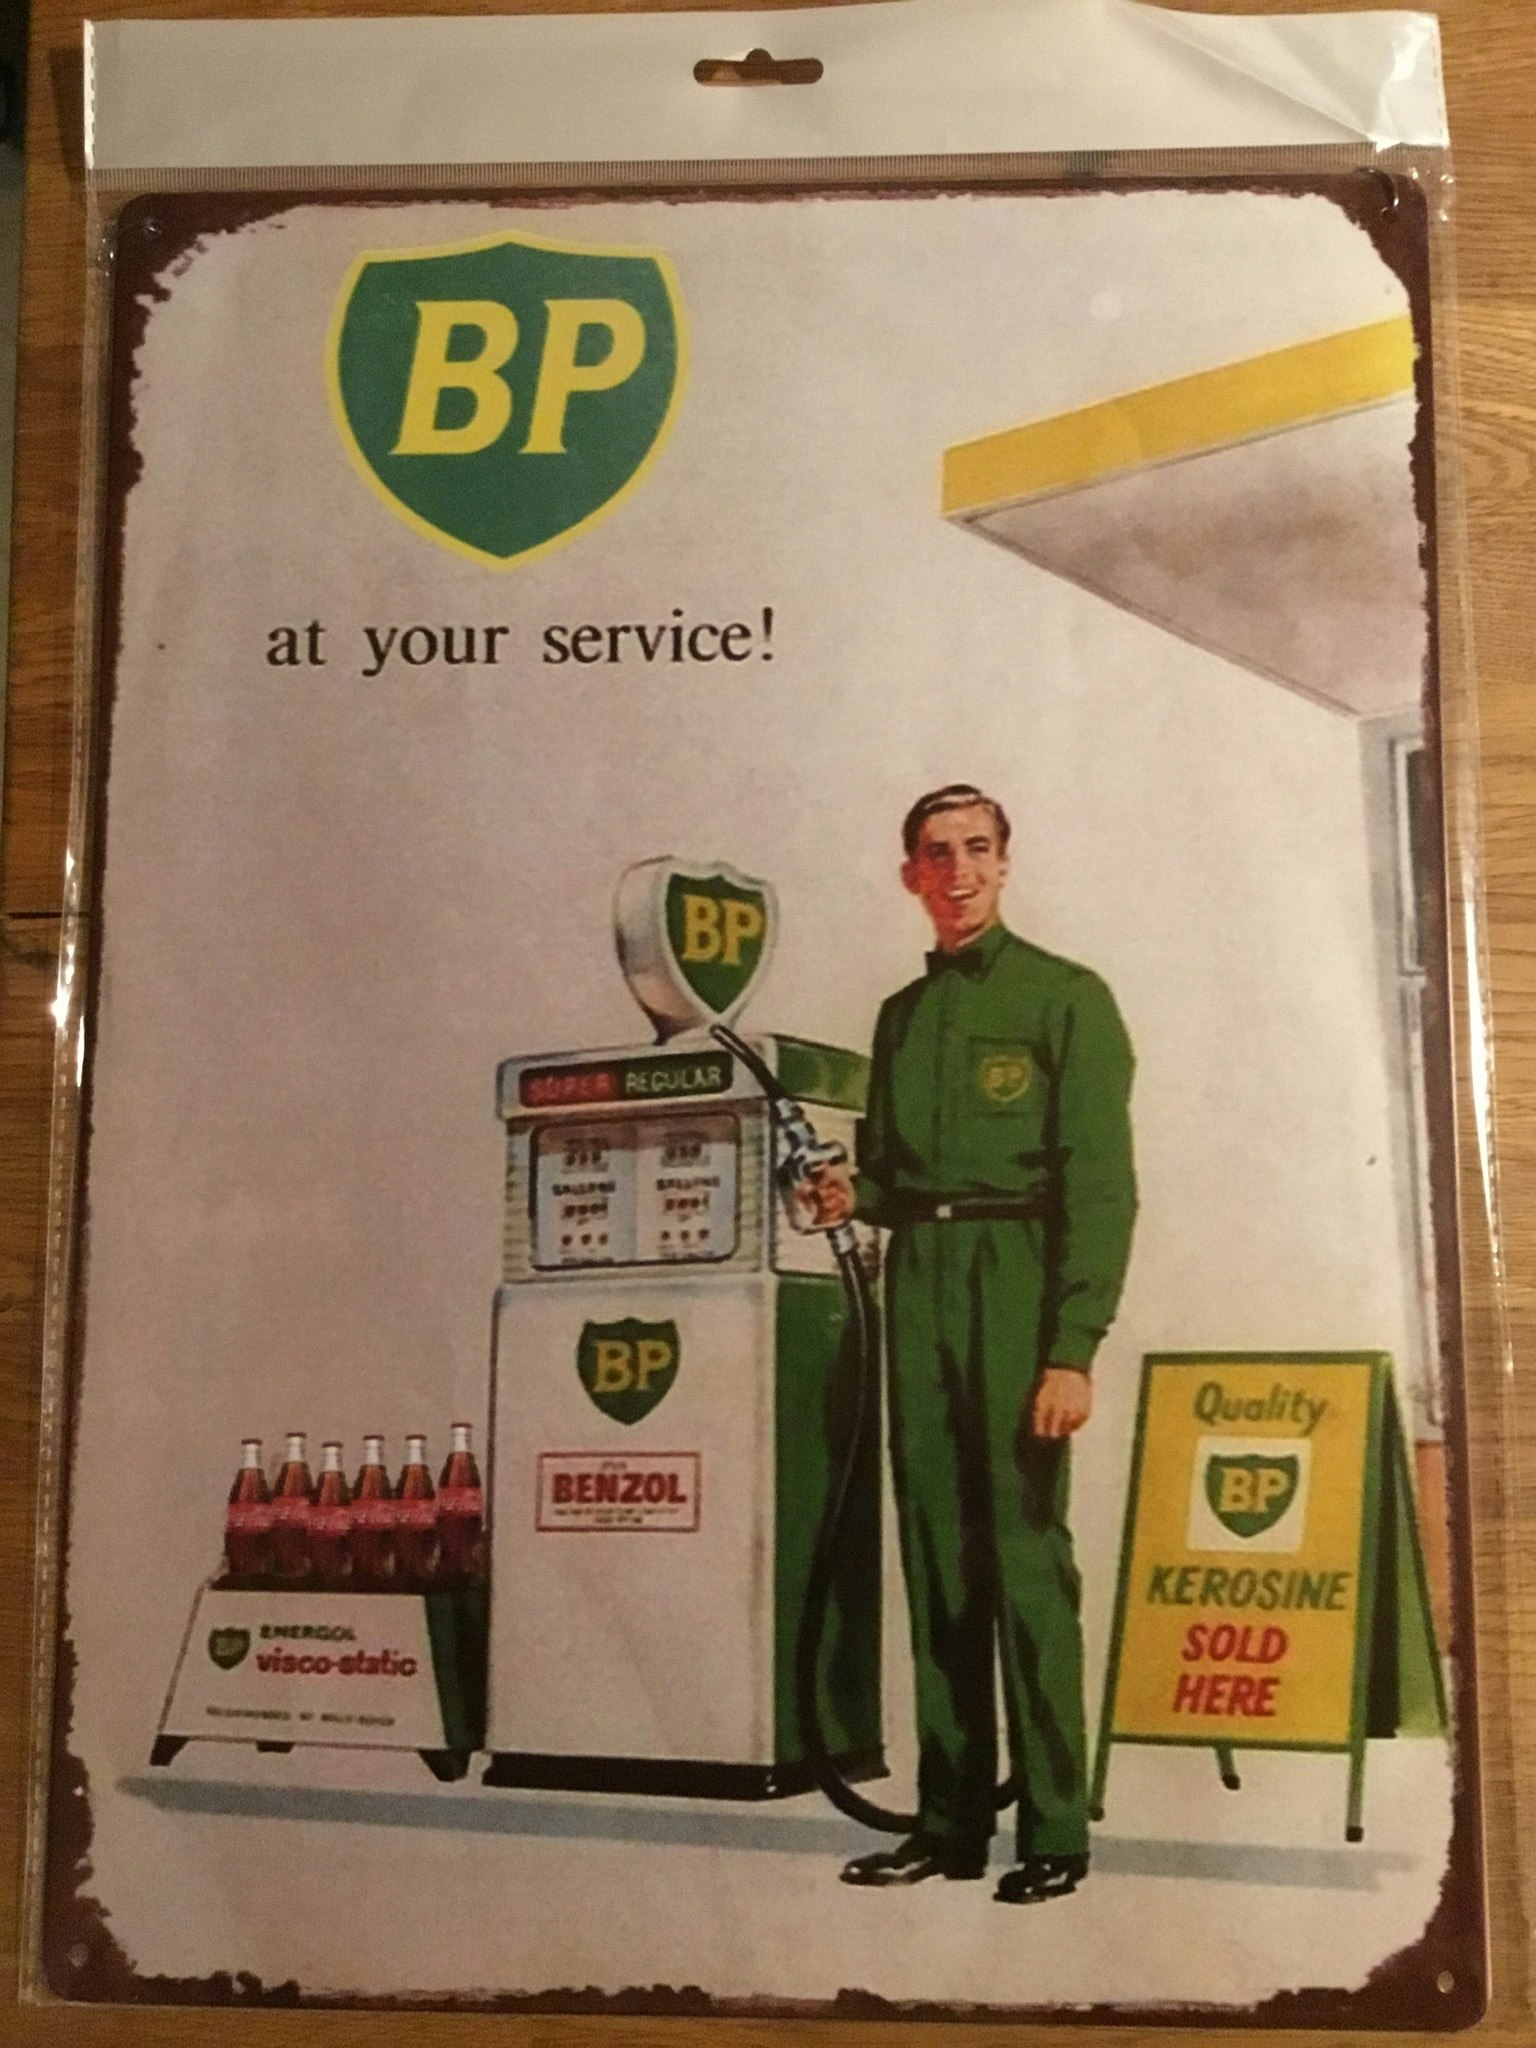 Bp at your service